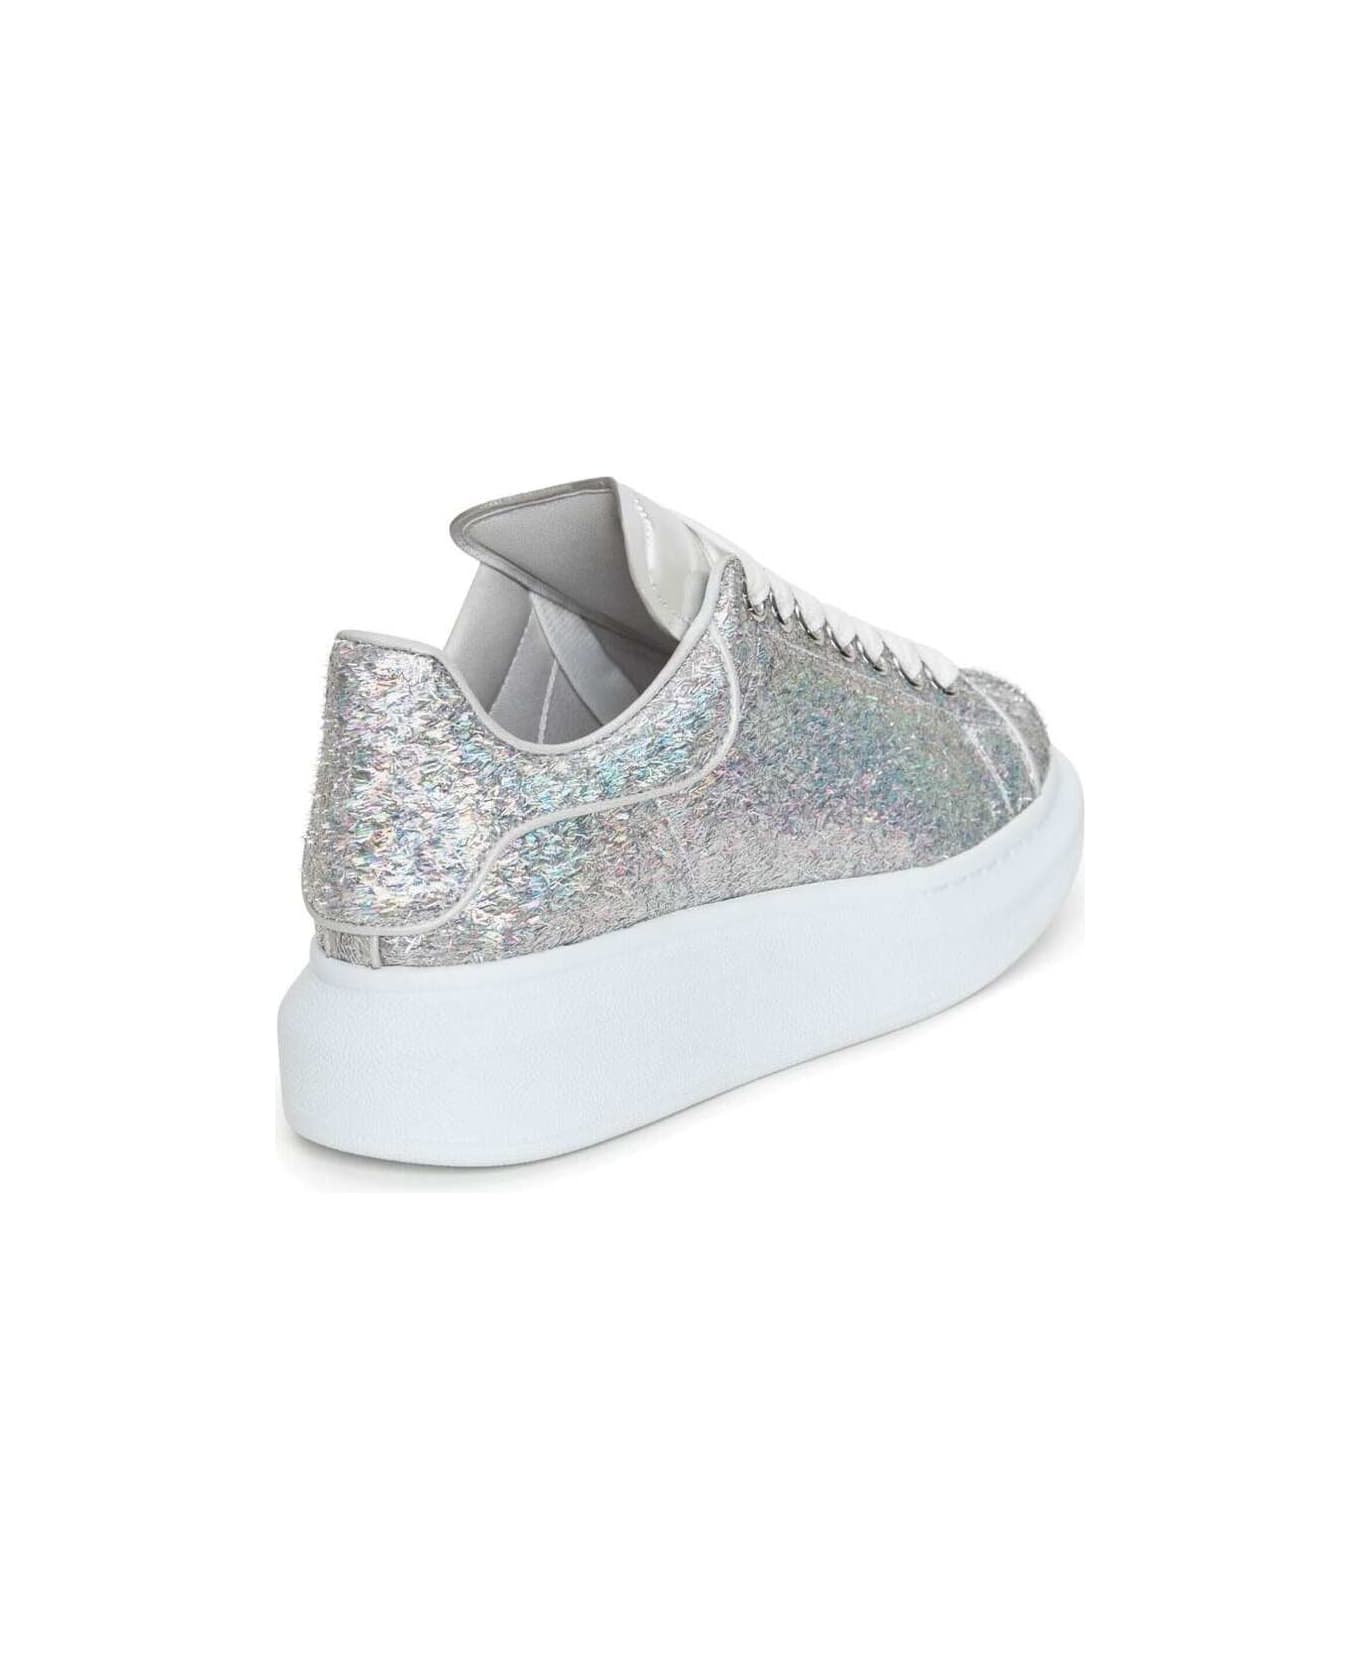 Alexander McQueen Silver Low Top Sneakers With All-over Glitters And Oversized Platform In Faux Leather Woman - Metallic